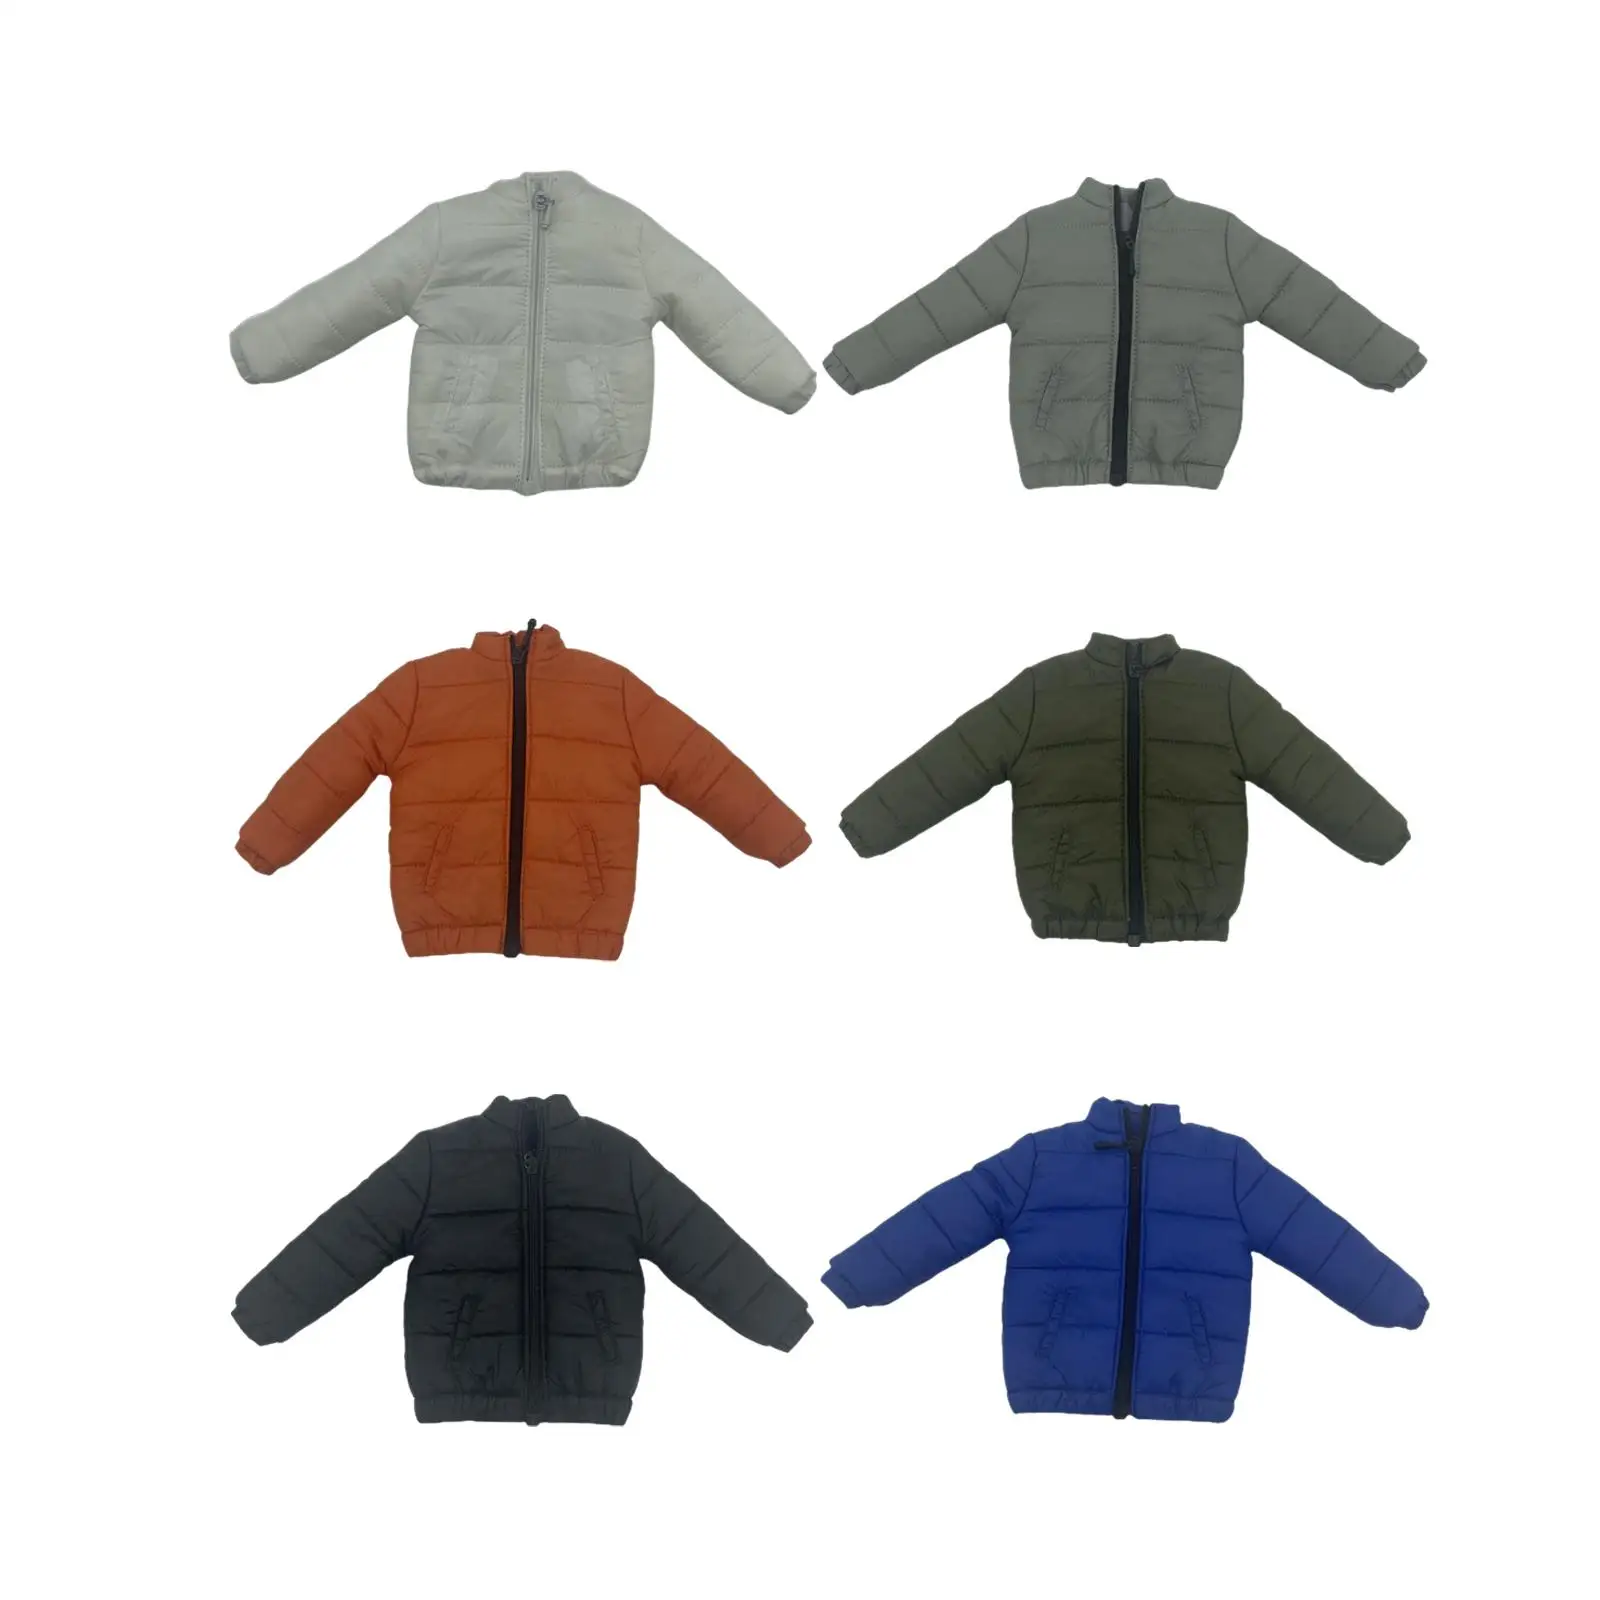 Fashion 1/6 Scale Doll Down Jacket Daily Wear Clothing Outfit Costume Accessories for 12 in Figures Doll Model Accessory